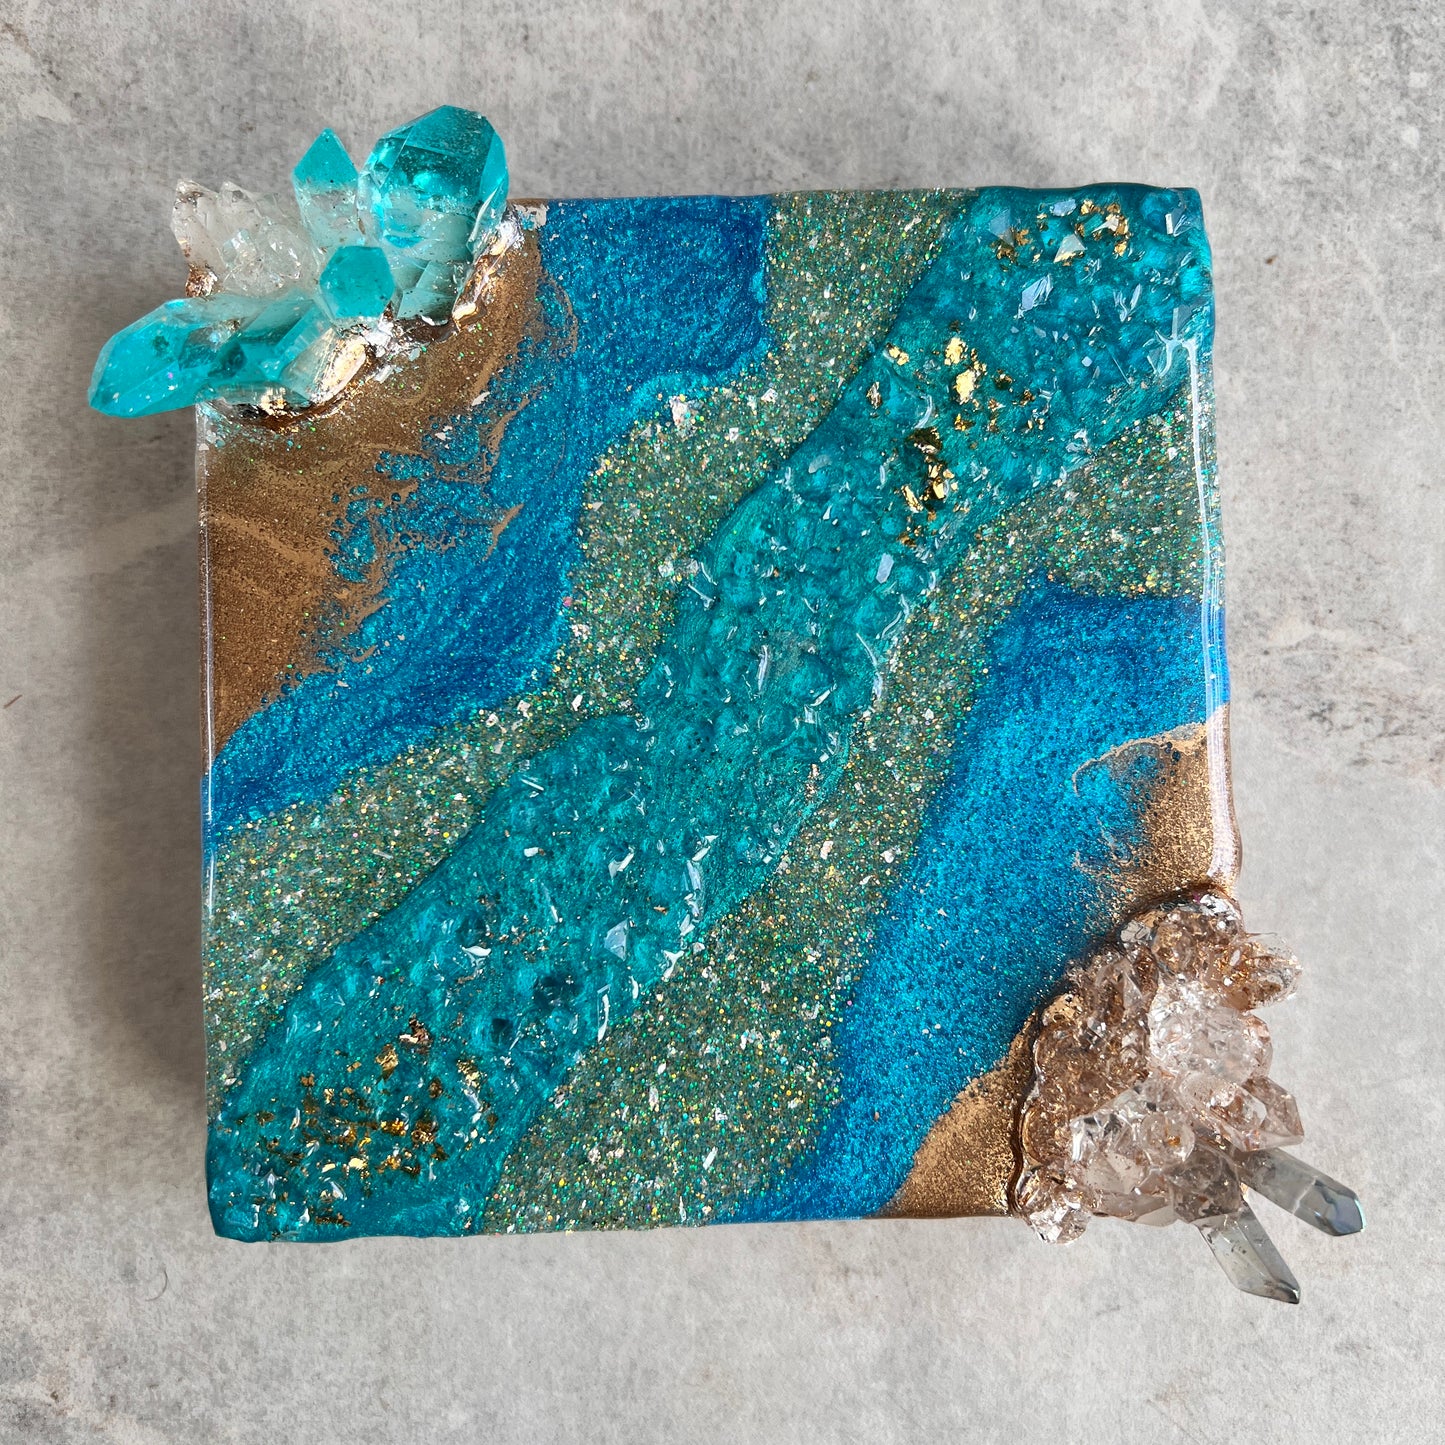 Caribbean Wave Mini Geode Artwork with Stand